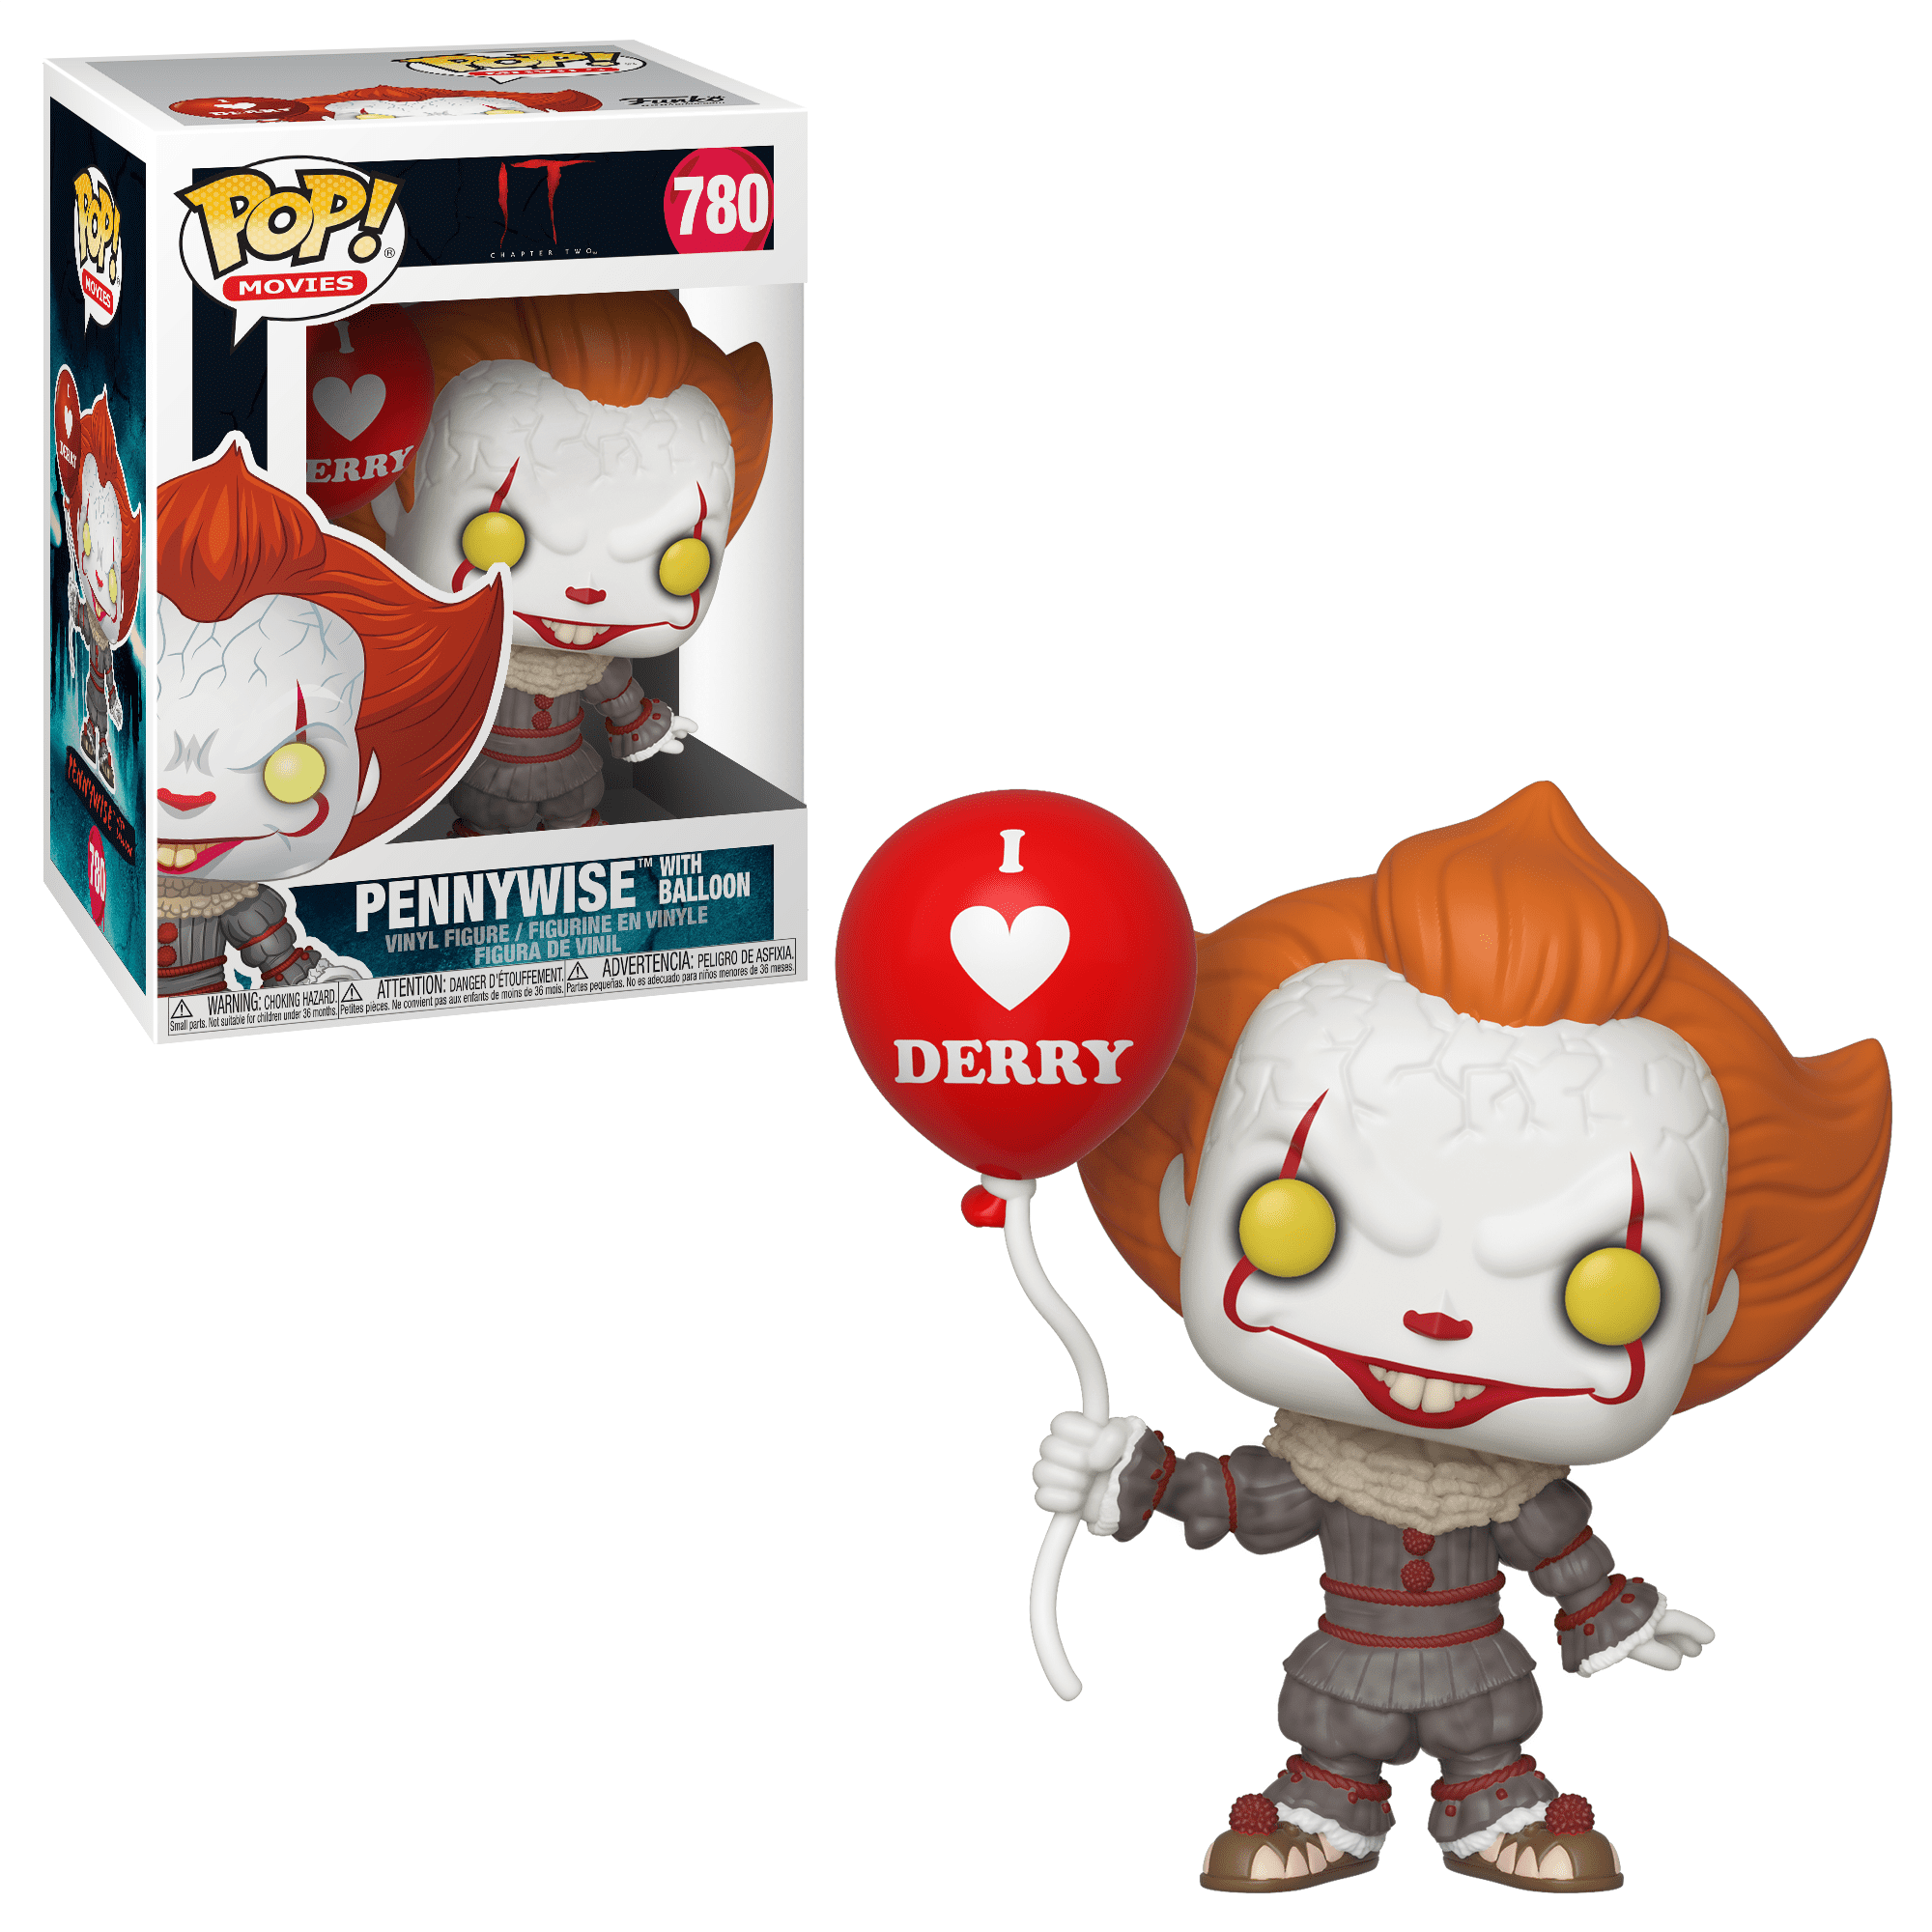 Funko Pop IT Pennywise Gigante 35 cm aprox 